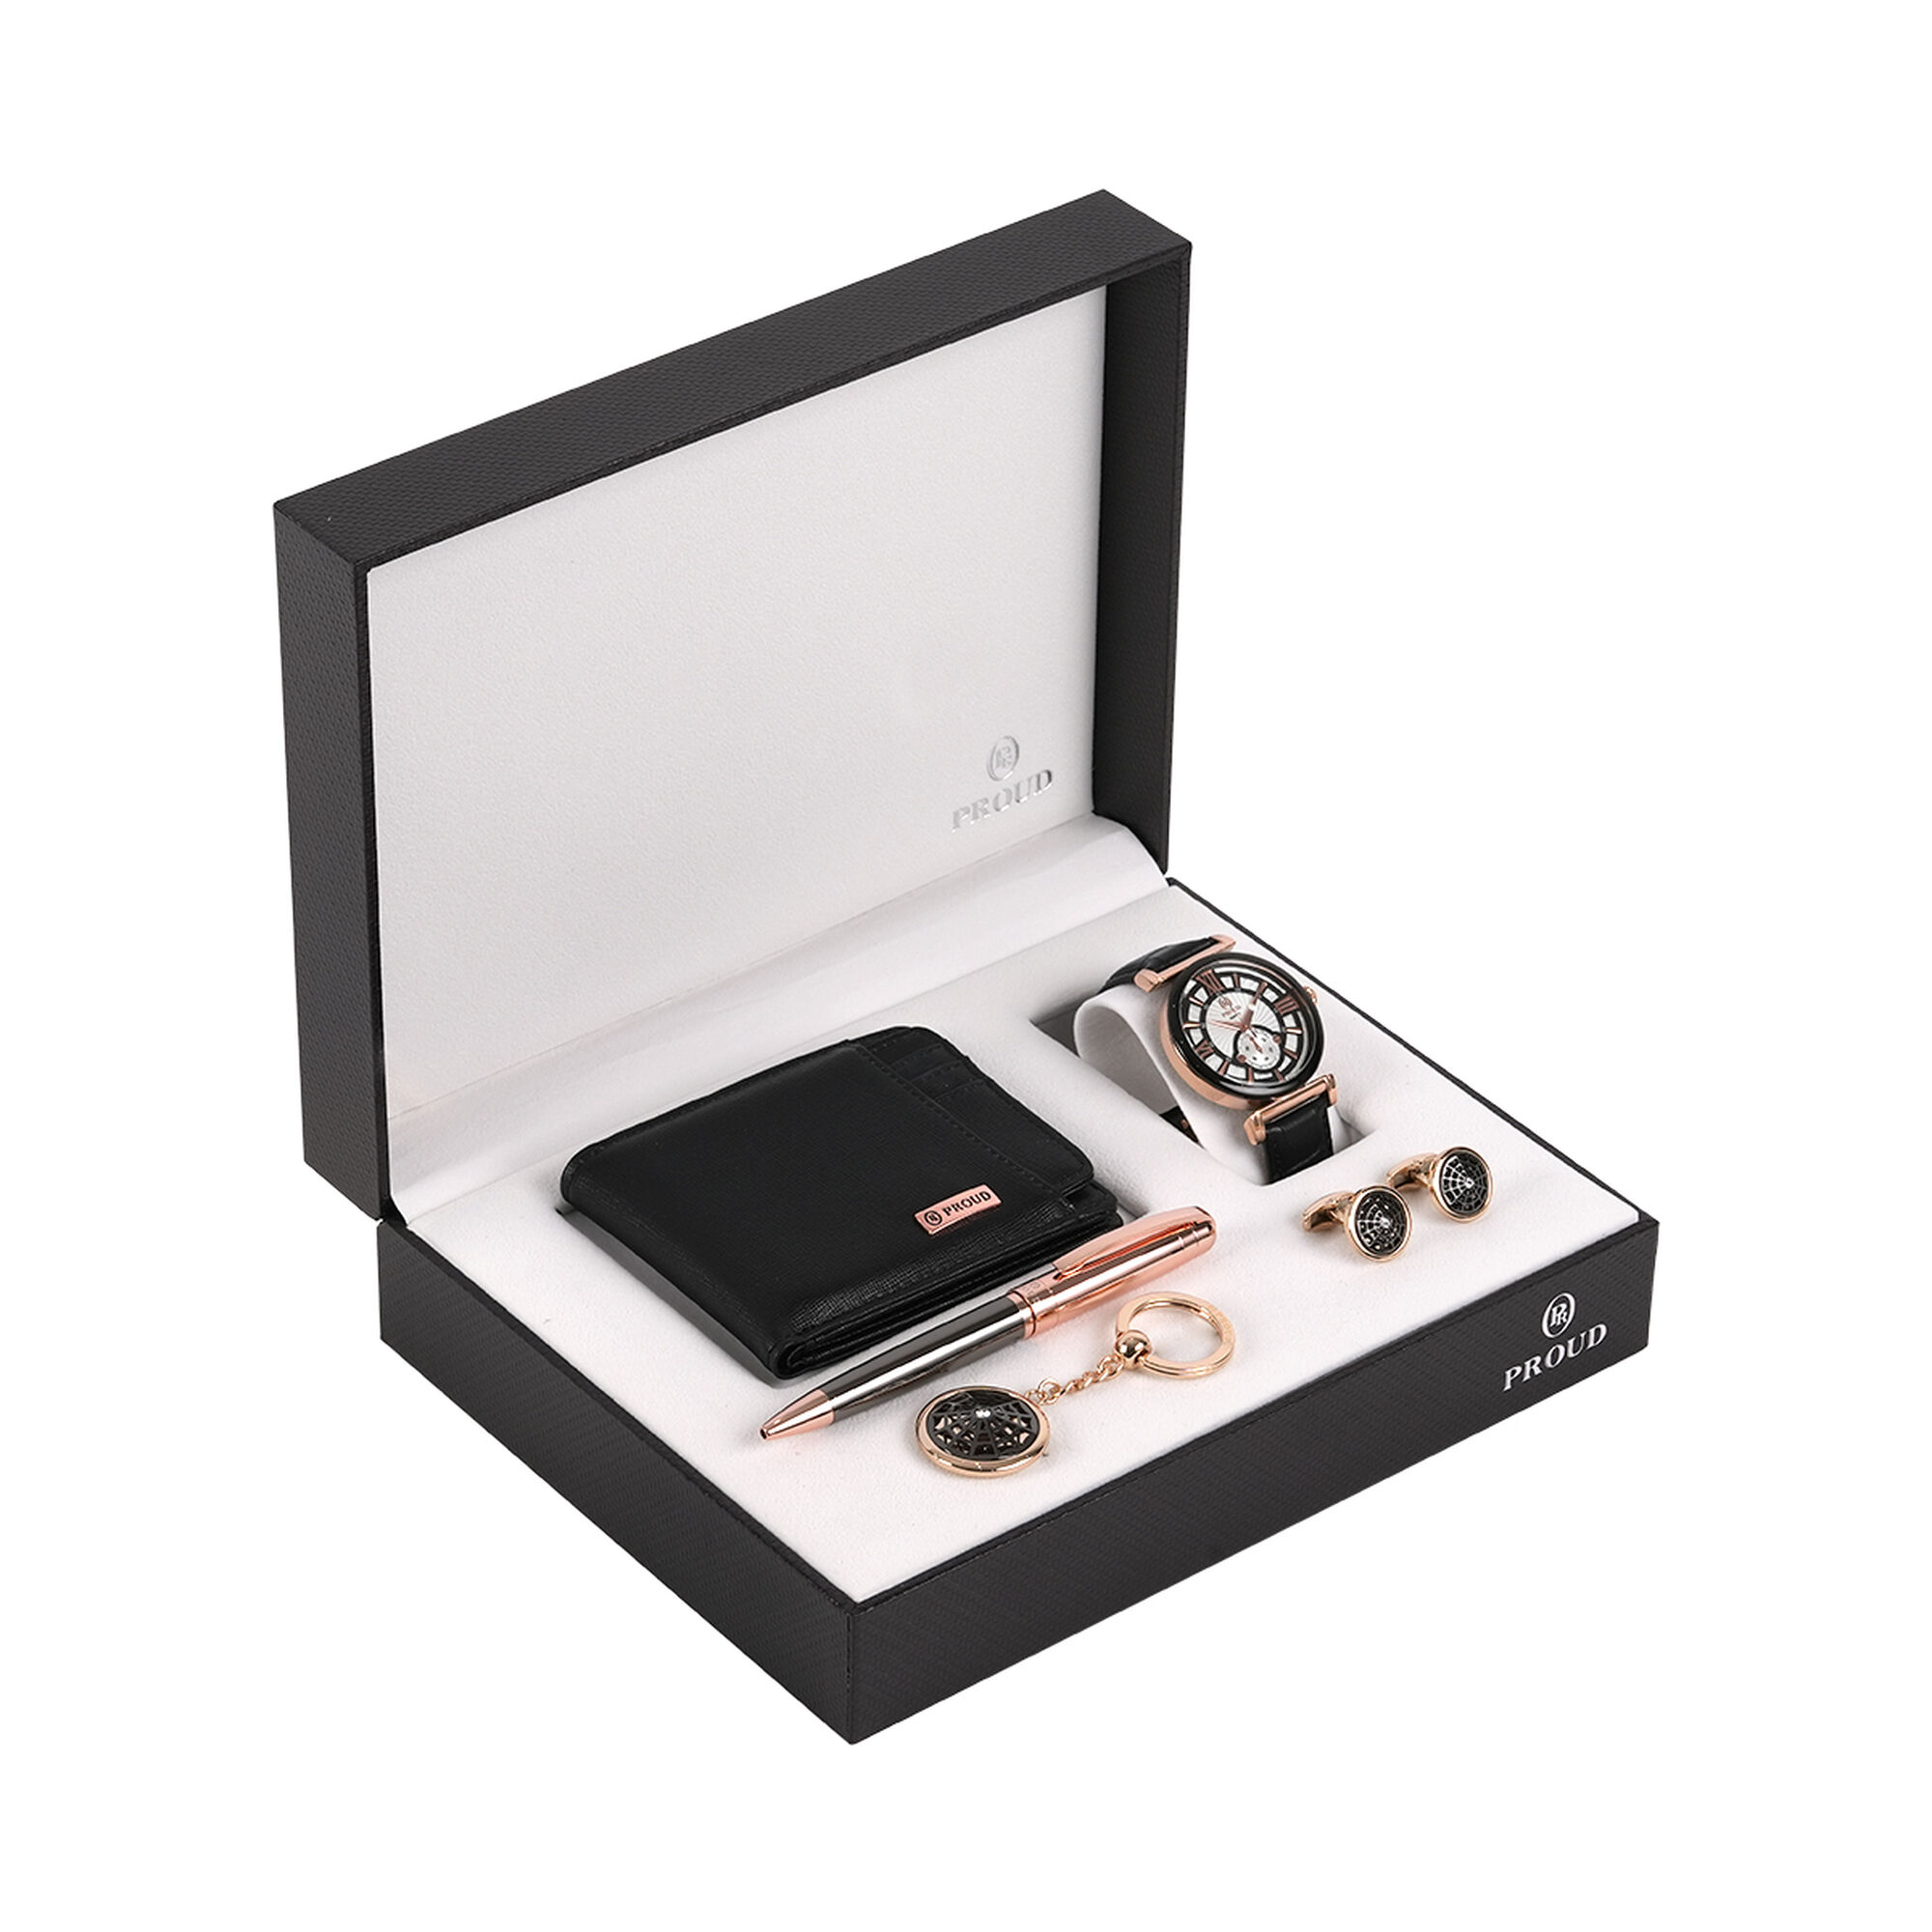 Proud accessories giftset rosegold 5 pcs.